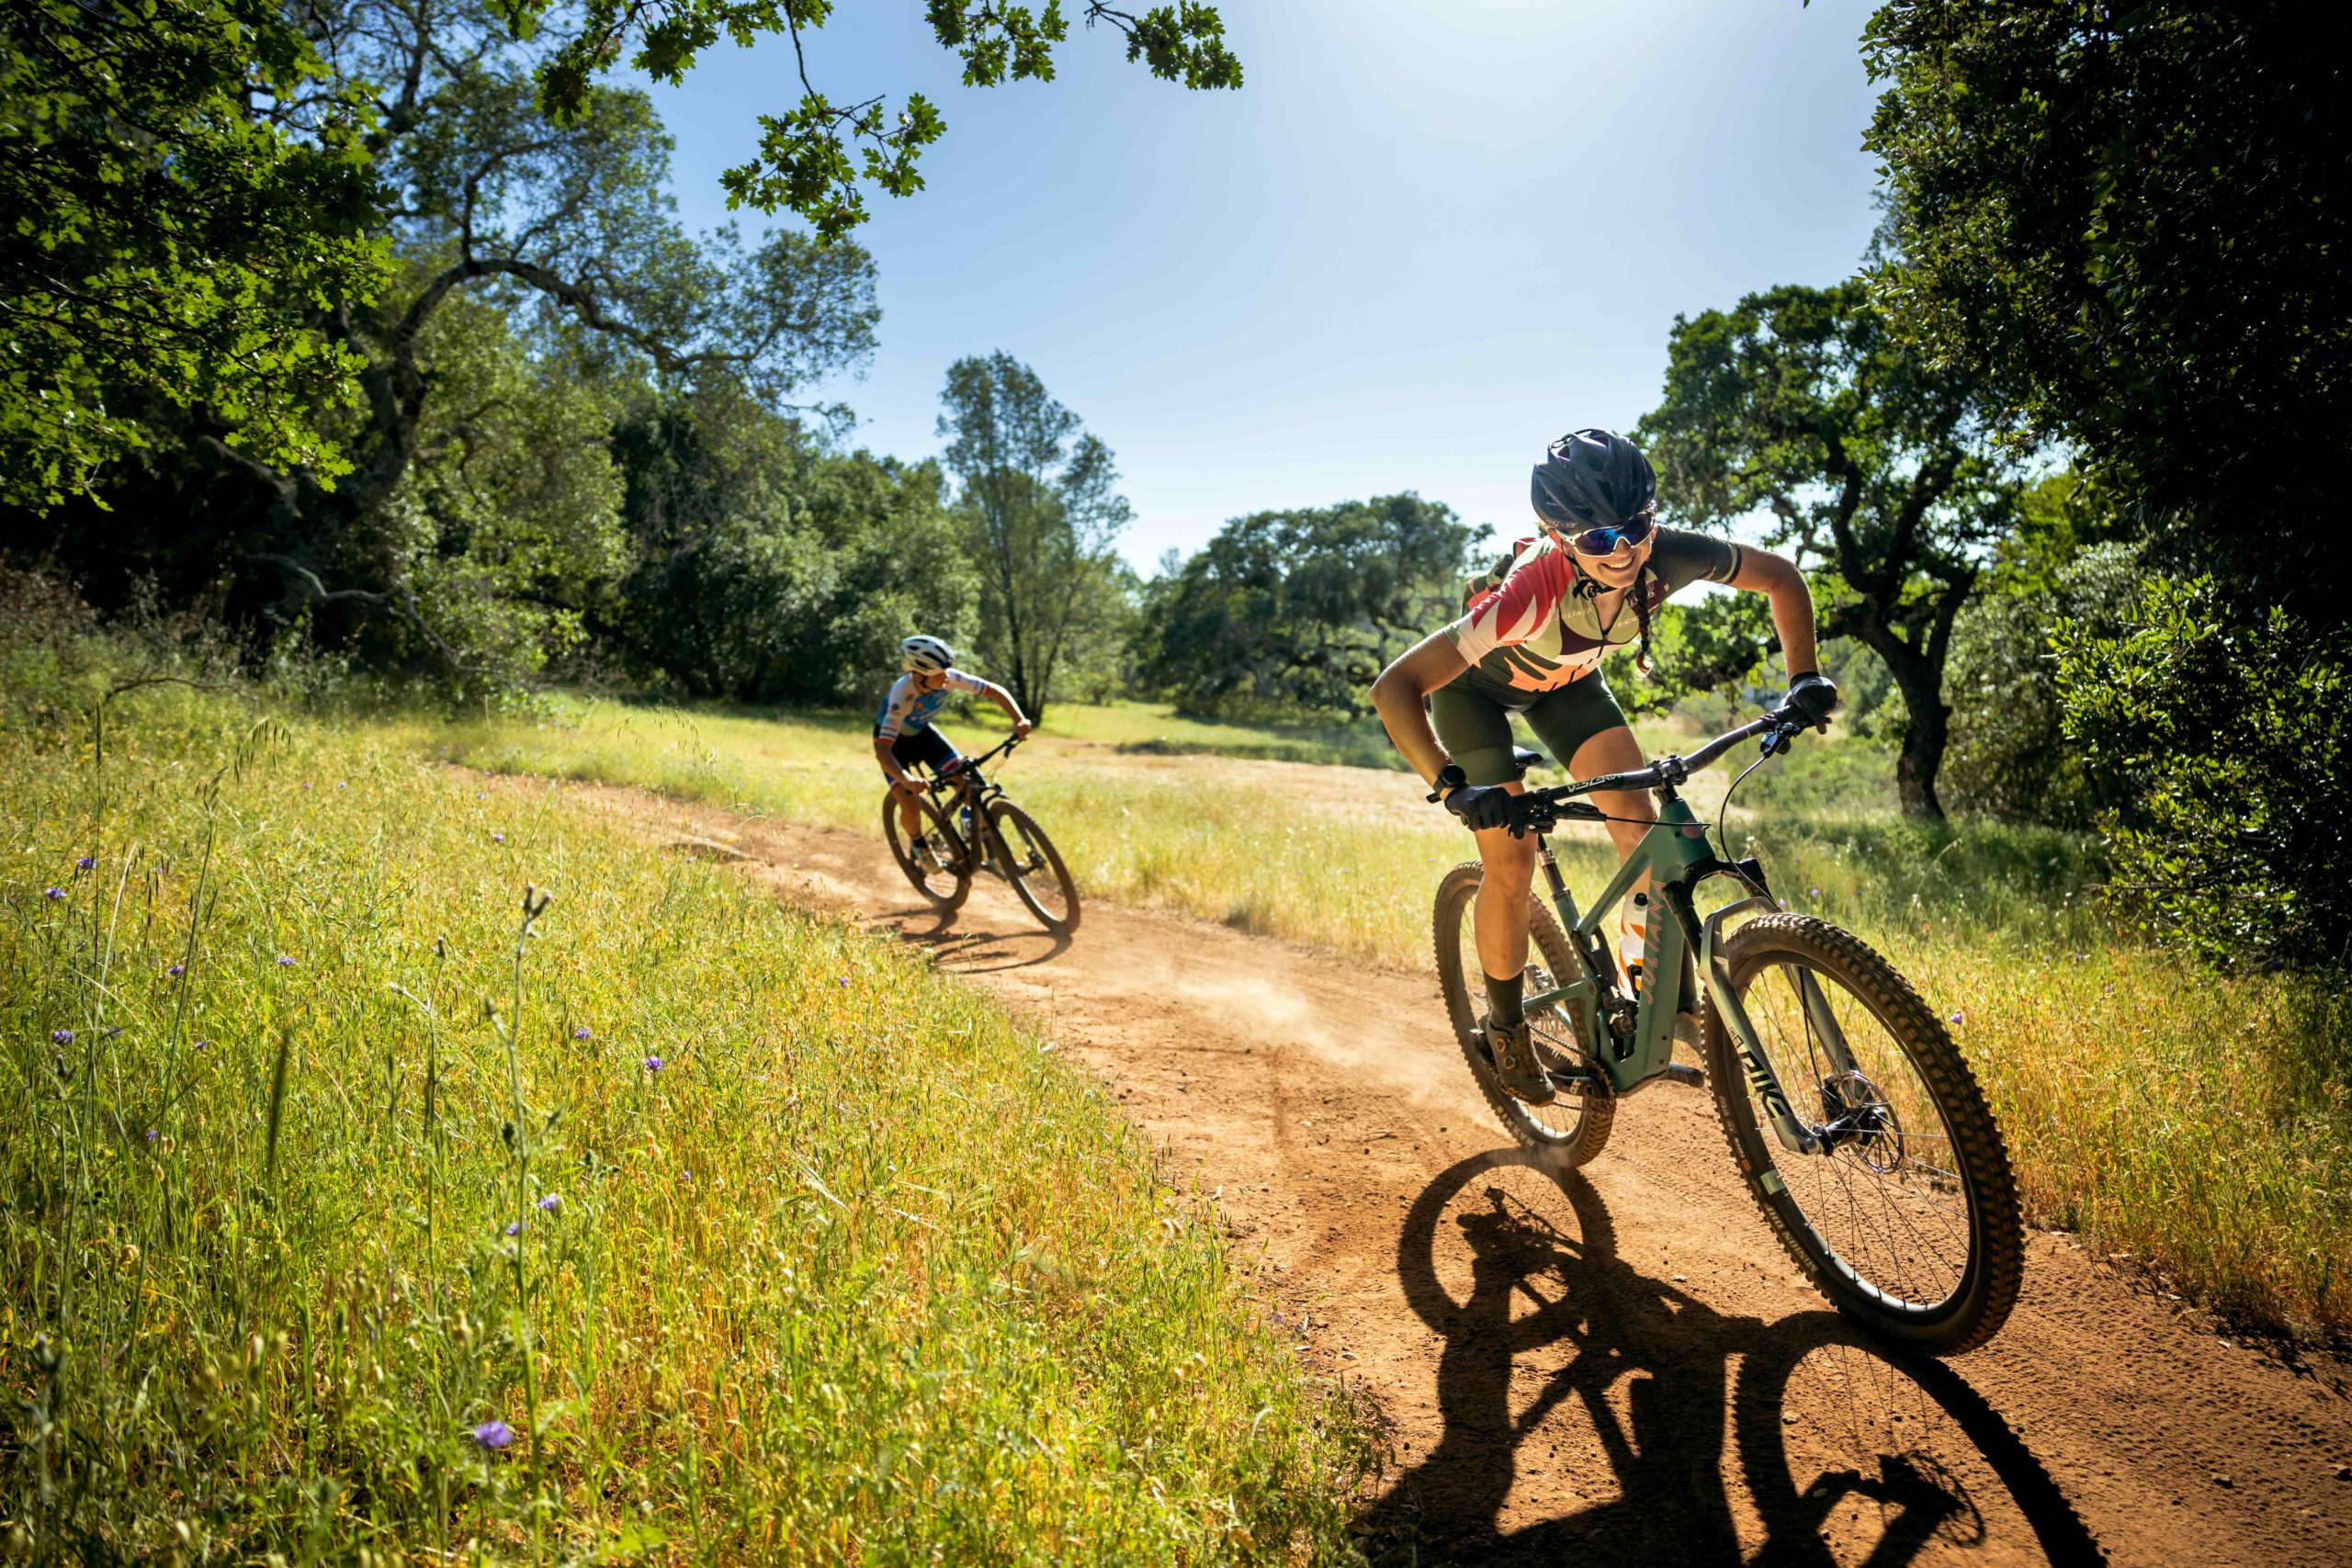 Pro mountain biker Larissa Connors, right, with her mentee, junior national champion rider Vida Lopez de San Roman, who lives in Sebastopol. The two often train together in Trione-Annadel State Park. (Chris Hardy)